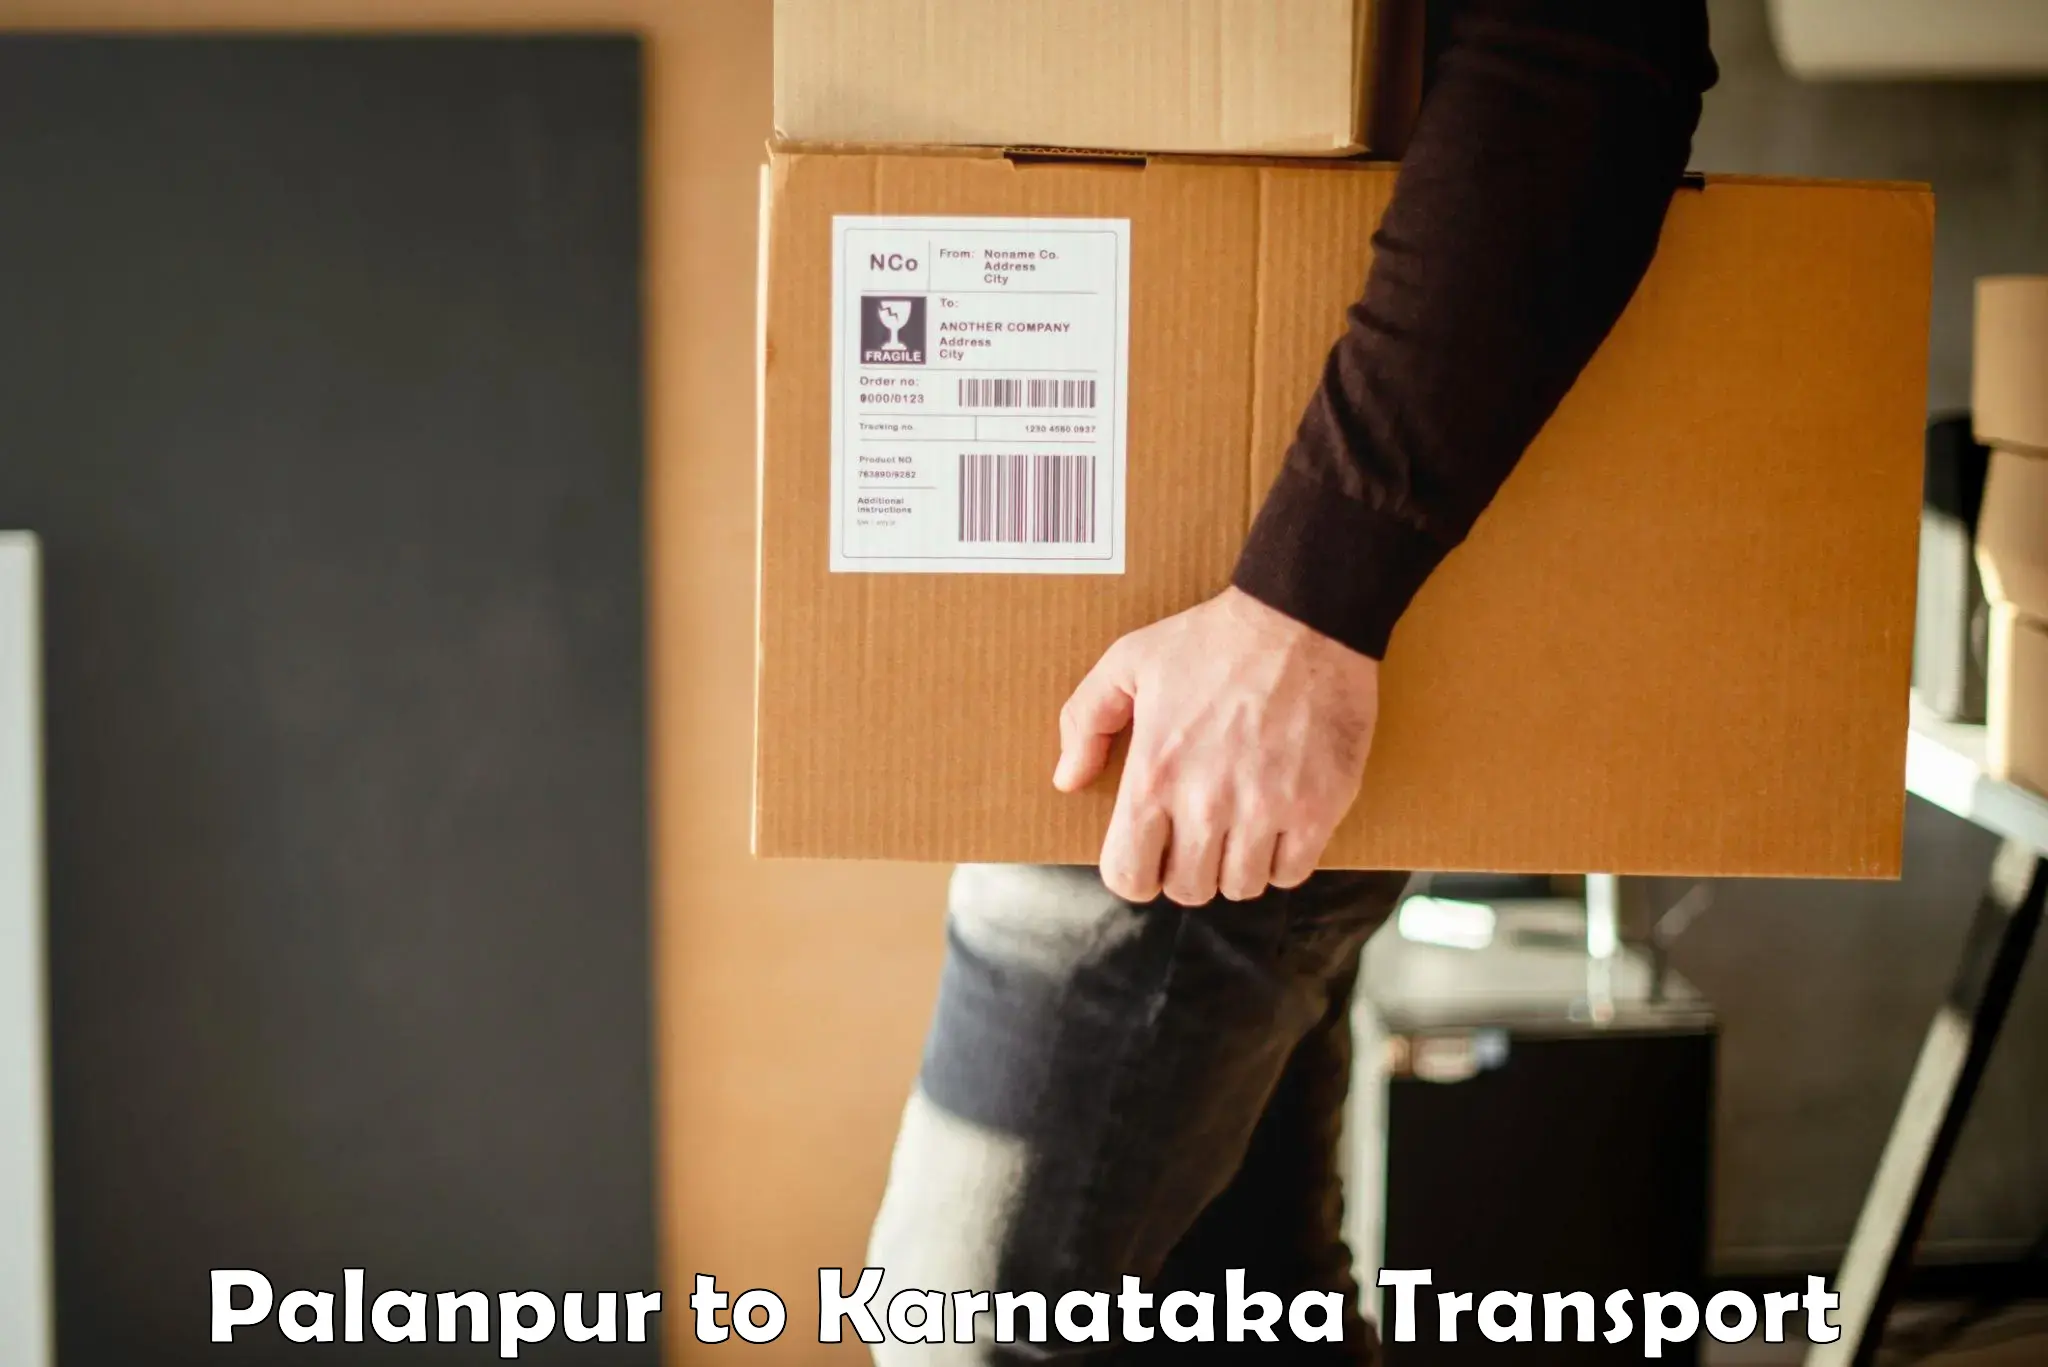 Pick up transport service Palanpur to Shorapur